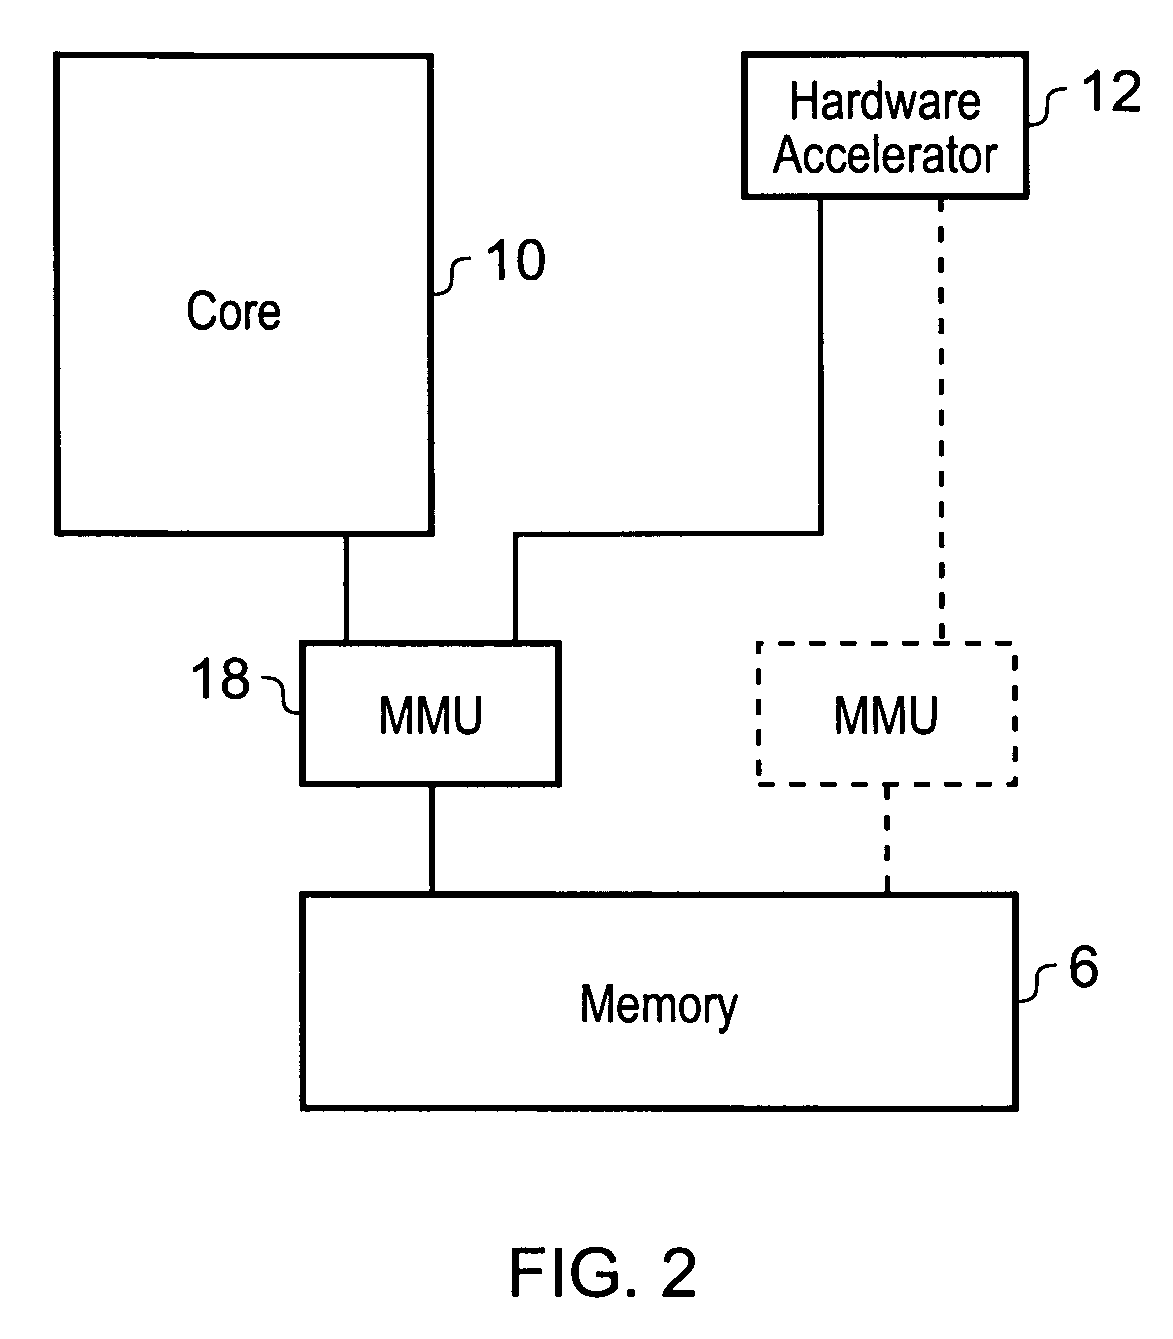 Controlling cleaning of data values within a hardware accelerator